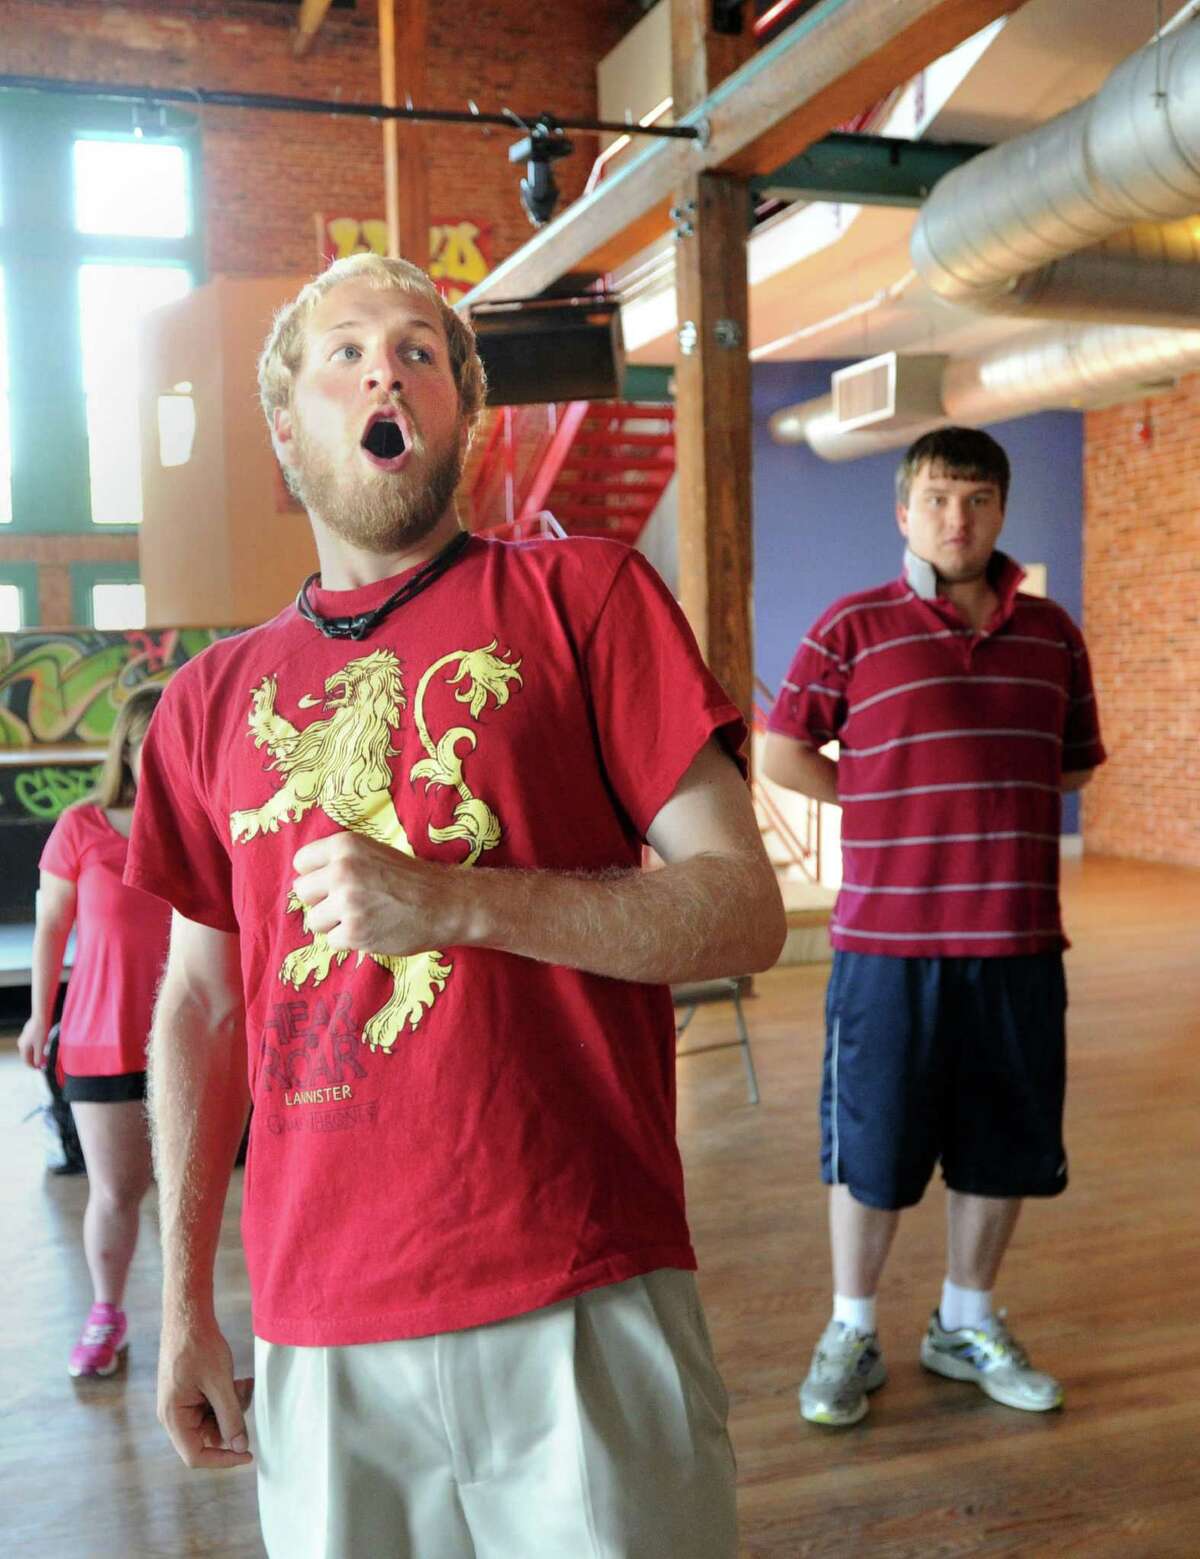 Off-Beat Player, Steve Hohl, as King Arthur, during rehearsal of Spamalot at the Arch Street Teen Center, Greenwich, Conn., Thursday night, July 24, 2014. The Off-Beat Players is a long-running theater program that brings together children both with and without special needs in all roles of the show. Spamalot will run August 6th through the 9th at the center.